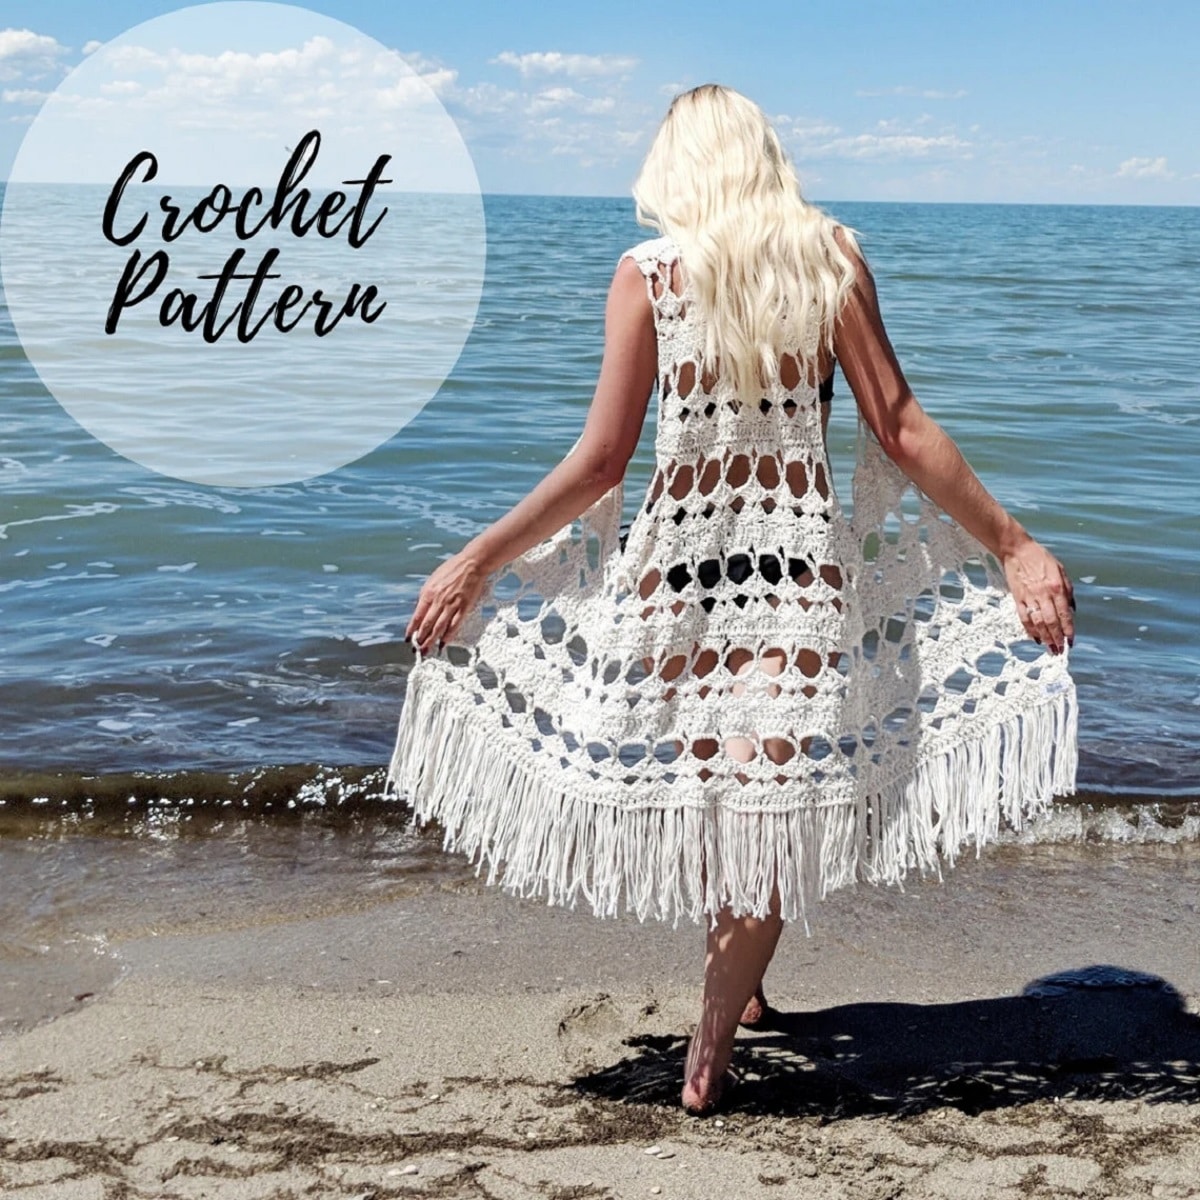 Blond woman staring out to the sea wearing a long white crochet vest with white tassels along the bottom.